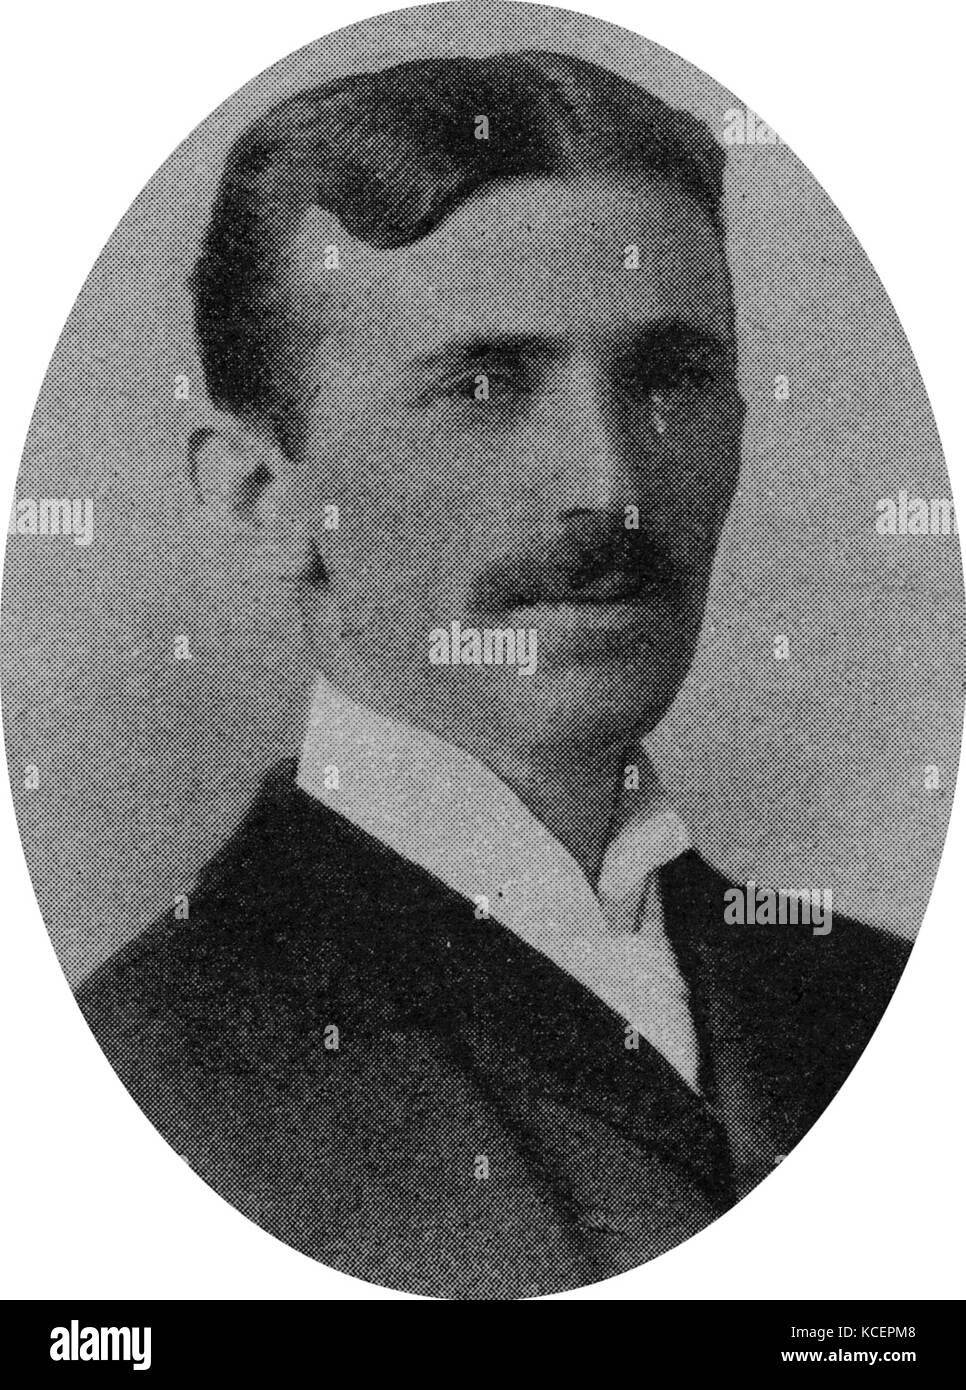 Photograph of Nikola Tesla (1856-1943) a Serbian-American inventor, electrical engineer, mechanical engineer, physicist, and futurist. Dated 19th Century Stock Photo